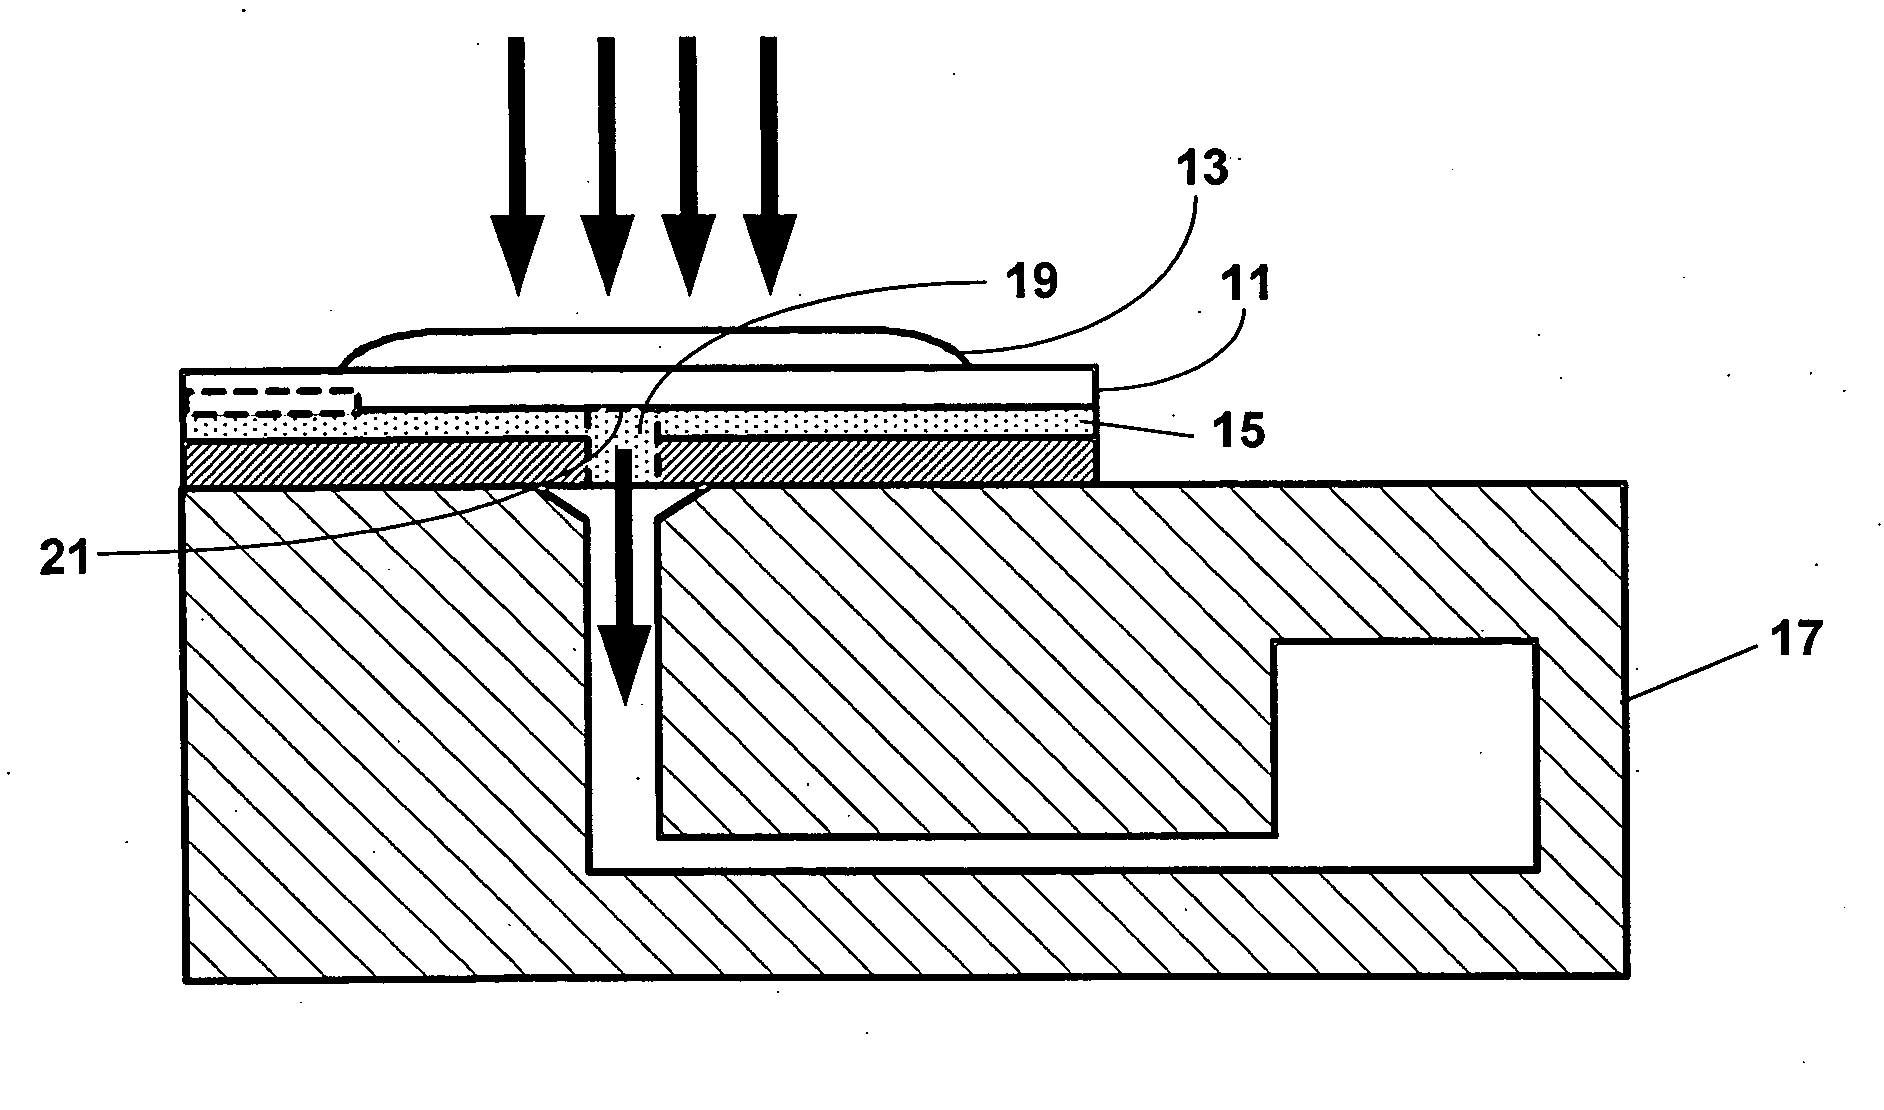 Point-of-care fluidic systems and uses thereof